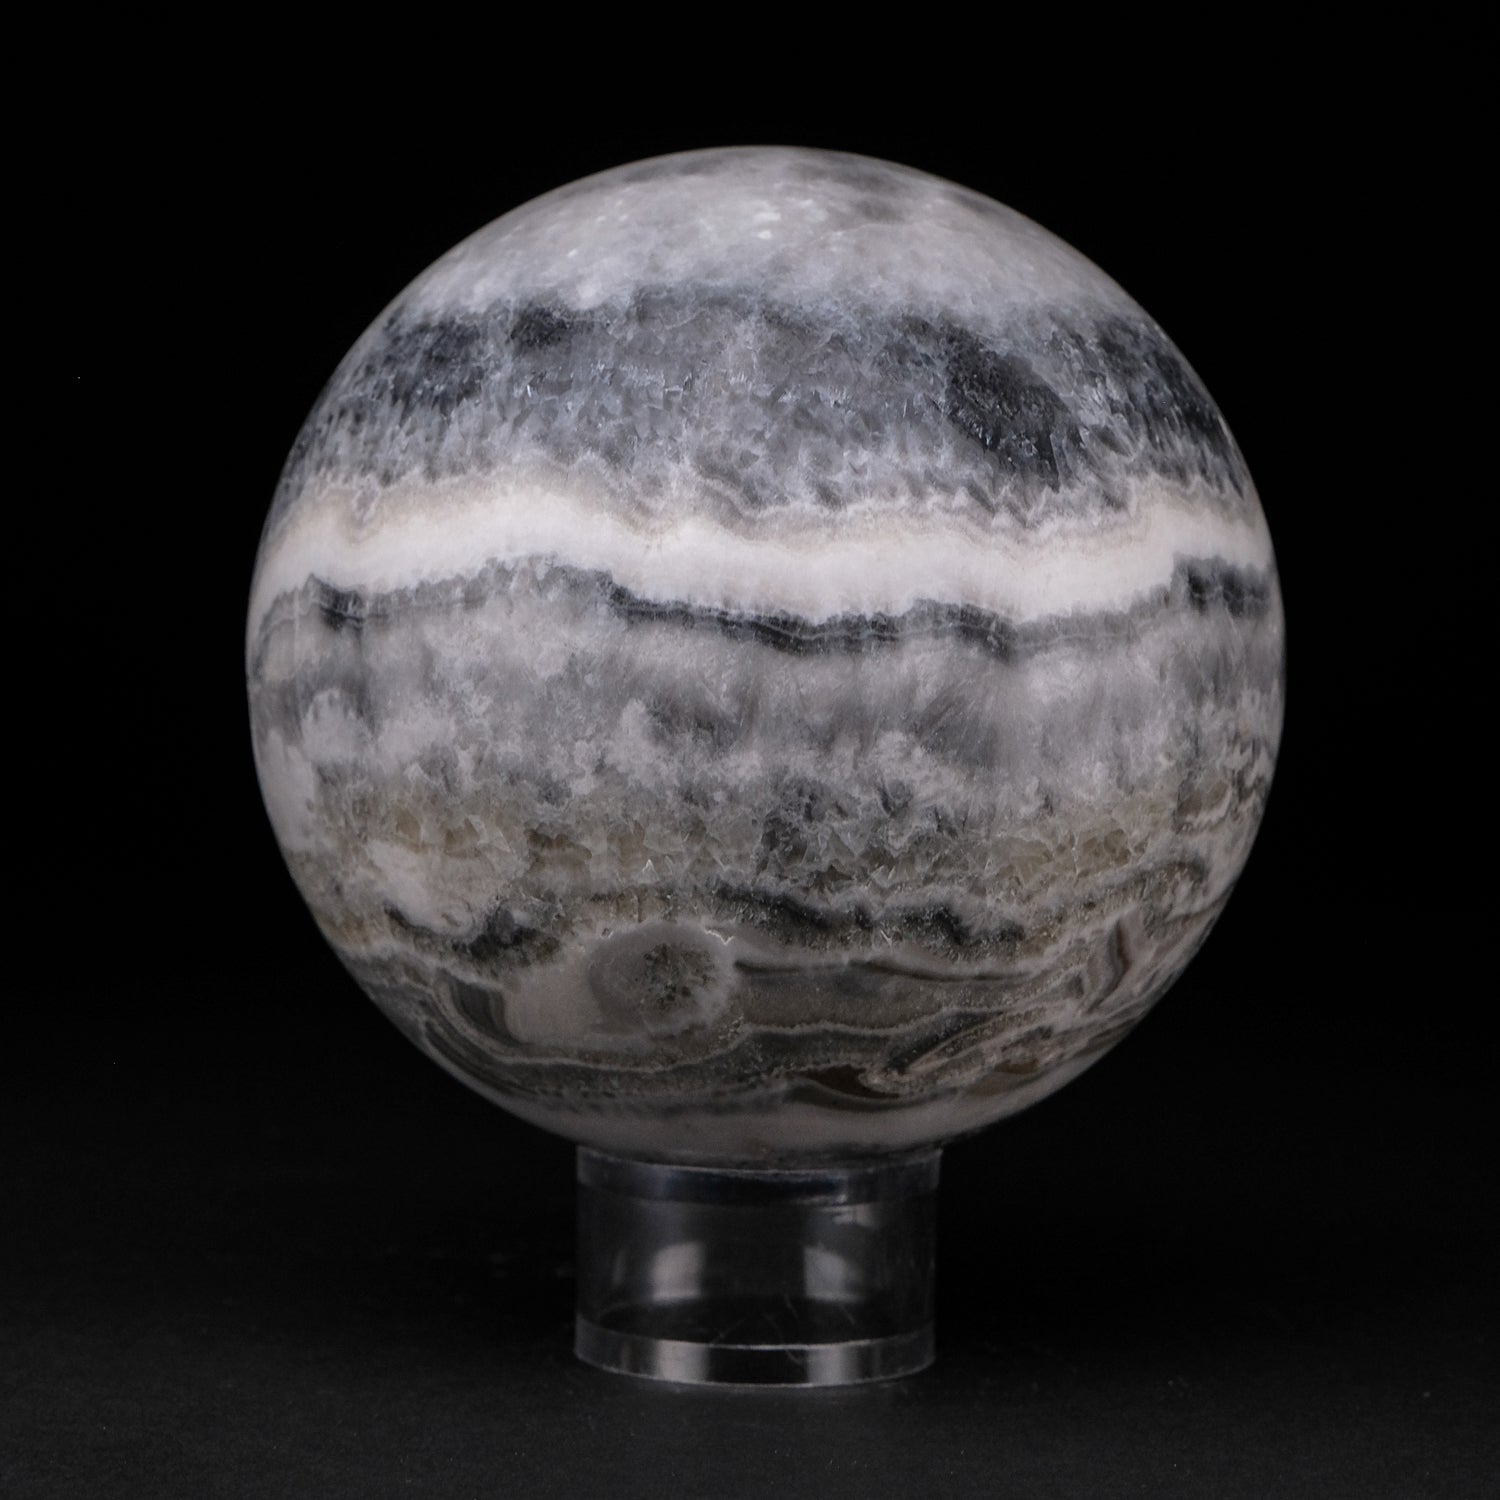 Genuine Polished Top Quality Gray Banded Onyx Sphere from Mexico (4.8 lbs)